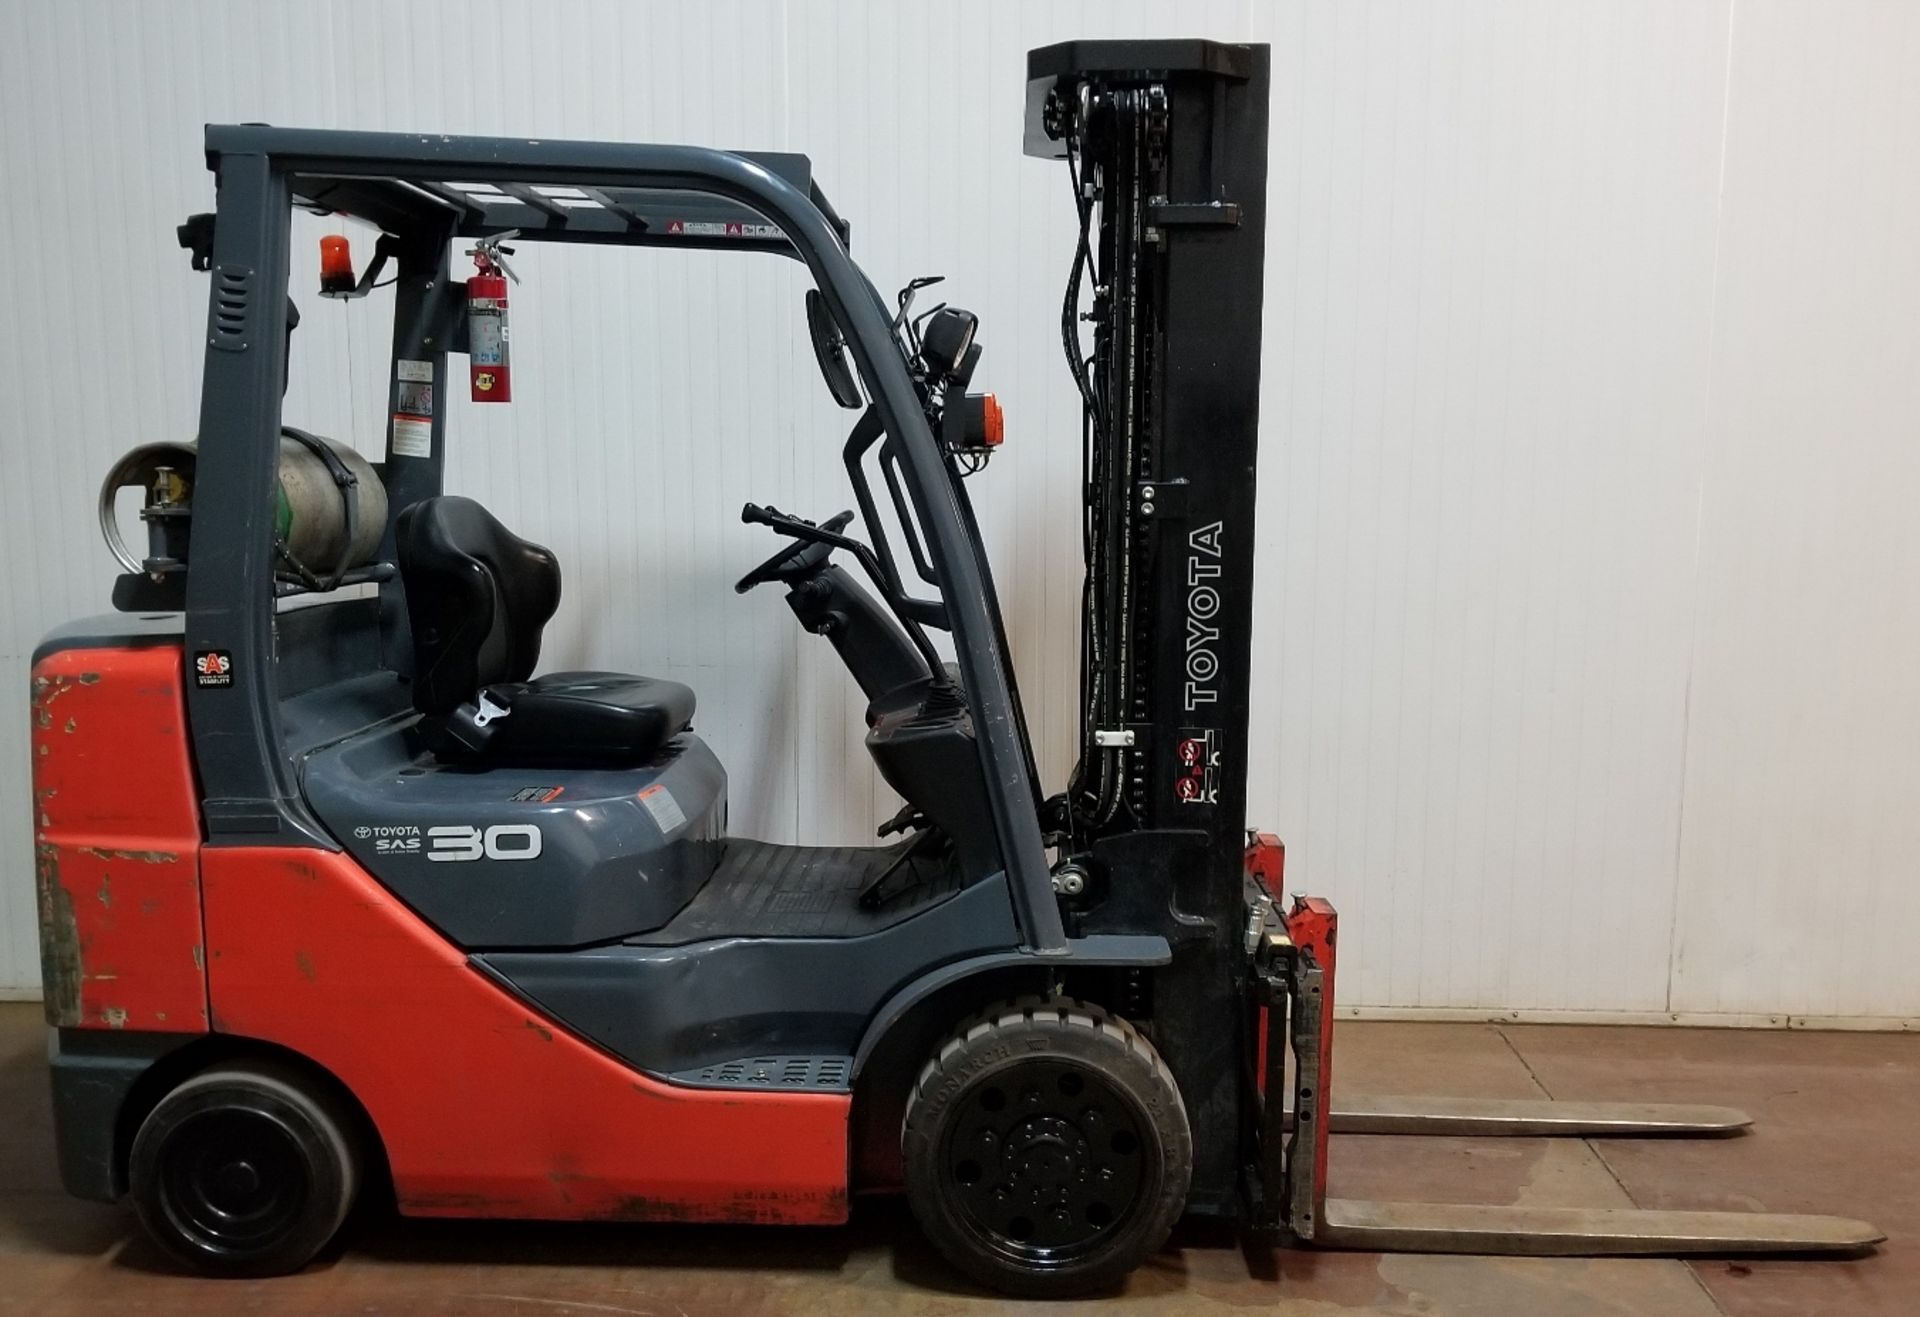 TOYOTA (2015) 8FGCU30 6,000 LB. CAPACITY LPG FORKLIFT WITH 187" MAX. LIFT HEIGHT, 3-STAGE MAST, SIDE